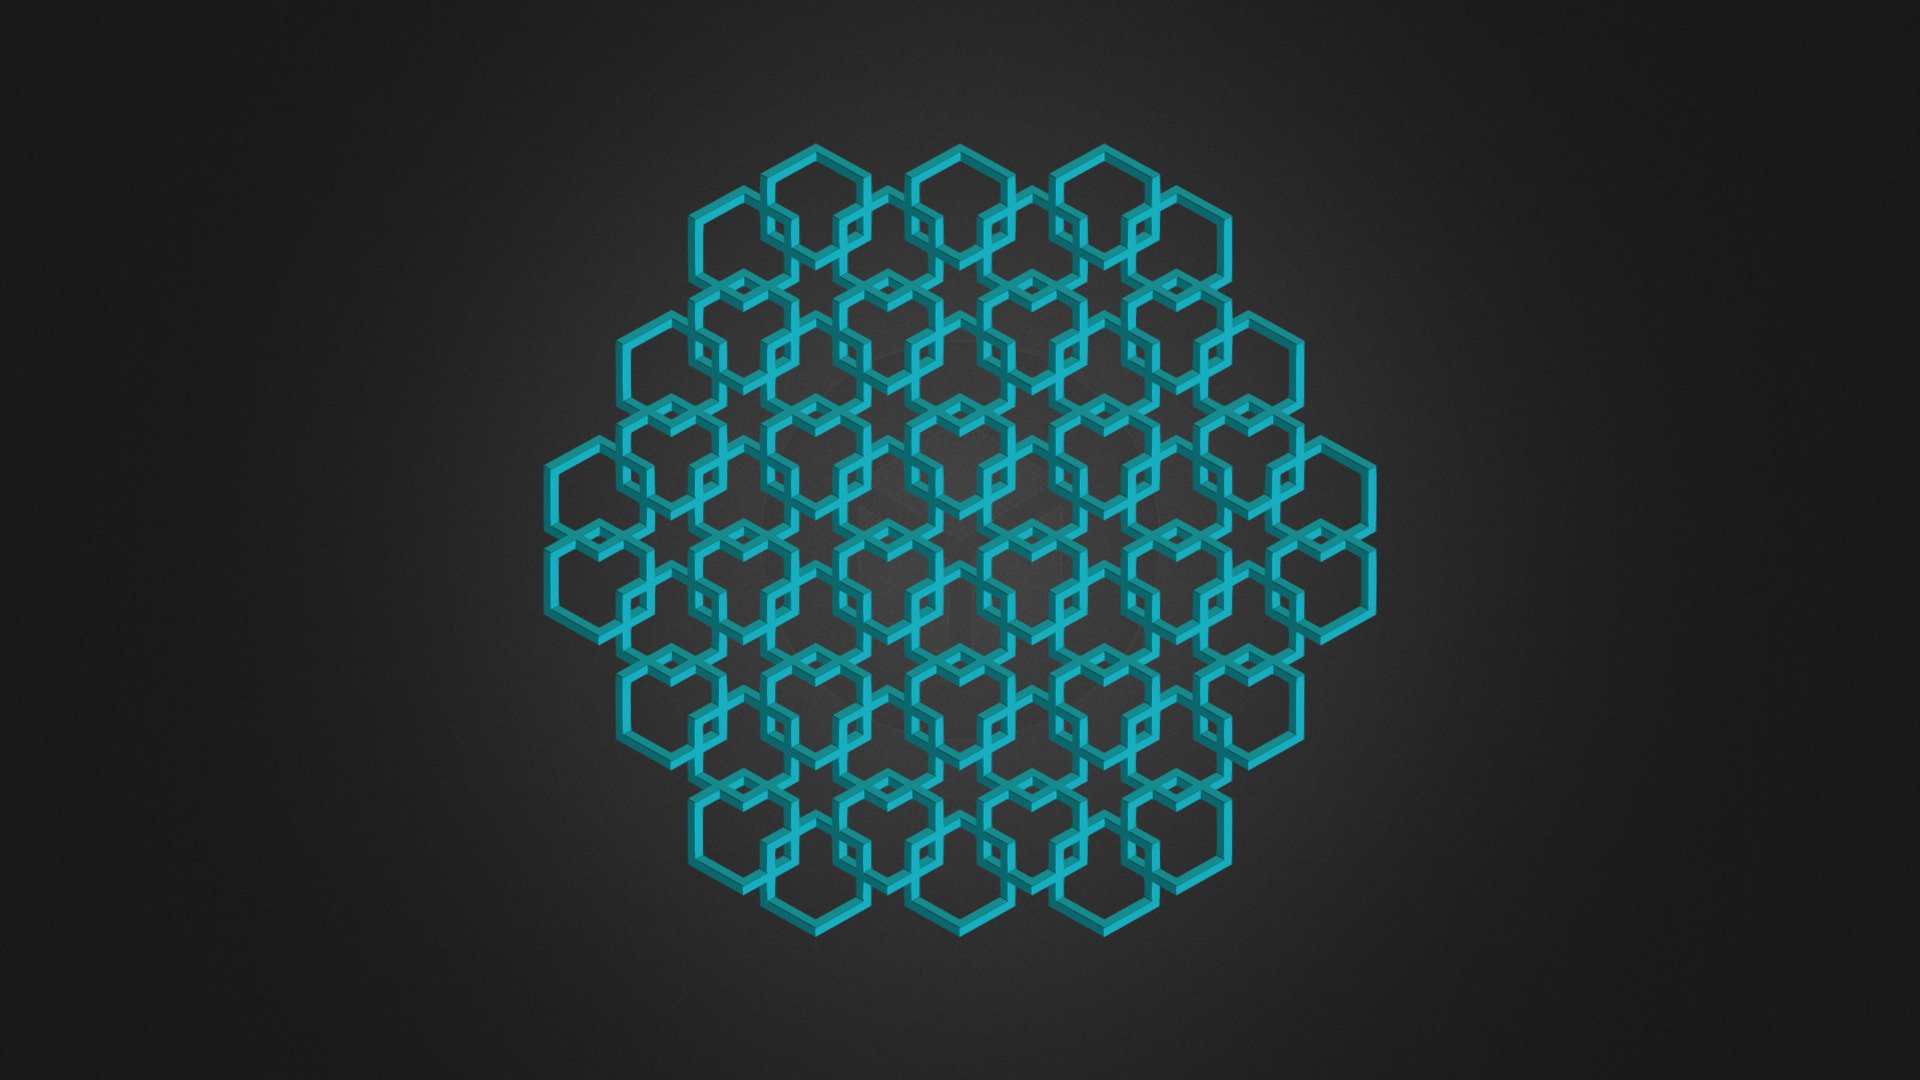 Hexagon based pattern reinterpreted as an isometric view of a cubic 3D structure.  

2D reference picture ▼  (top &ldquo;344